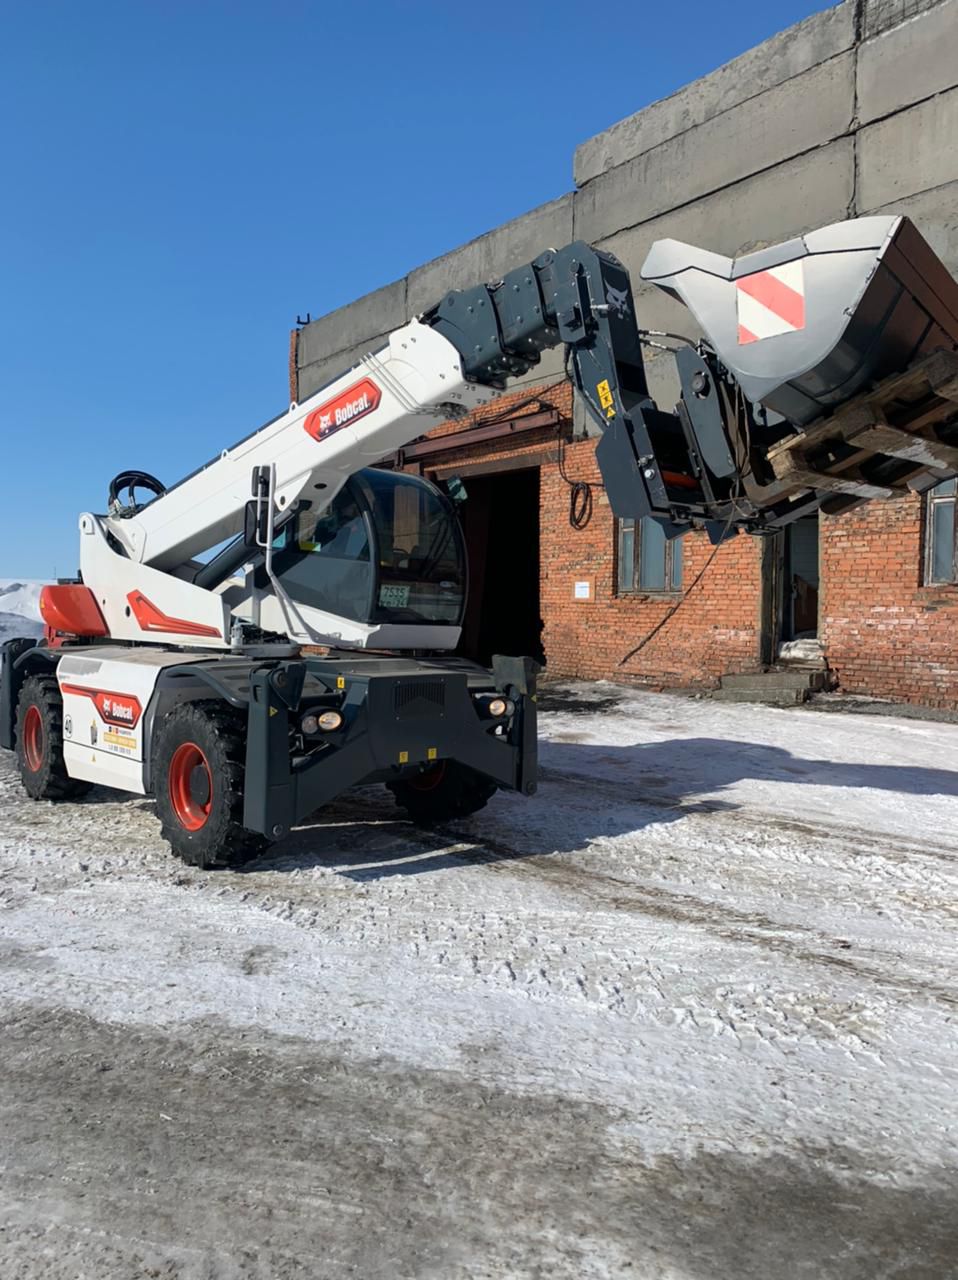 Norilsk Nickel invests in five New Bobcat Rotary Telehandlers in Russia